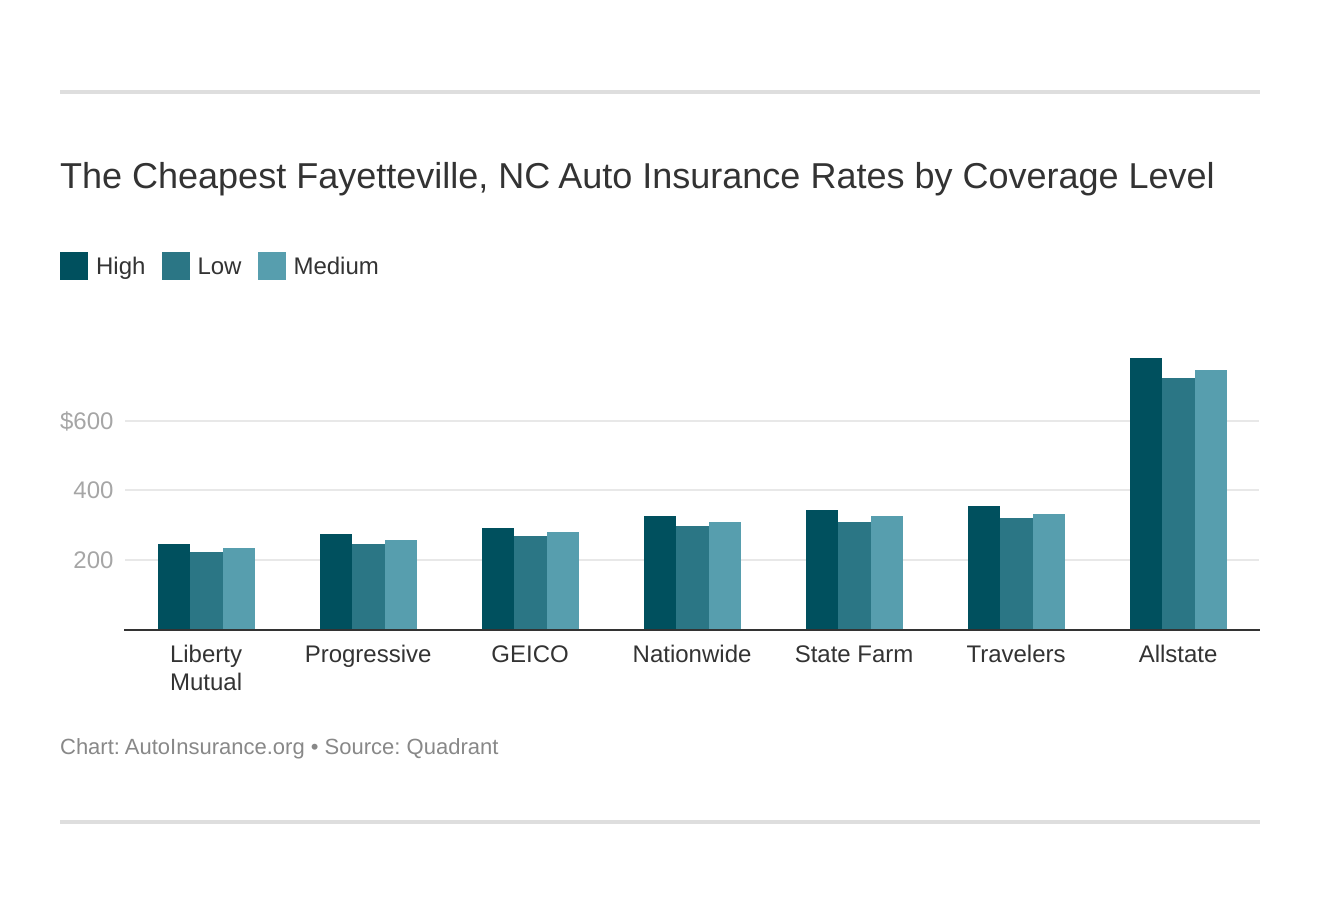 The Cheapest Fayetteville, NC Auto Insurance Rates by Coverage Level